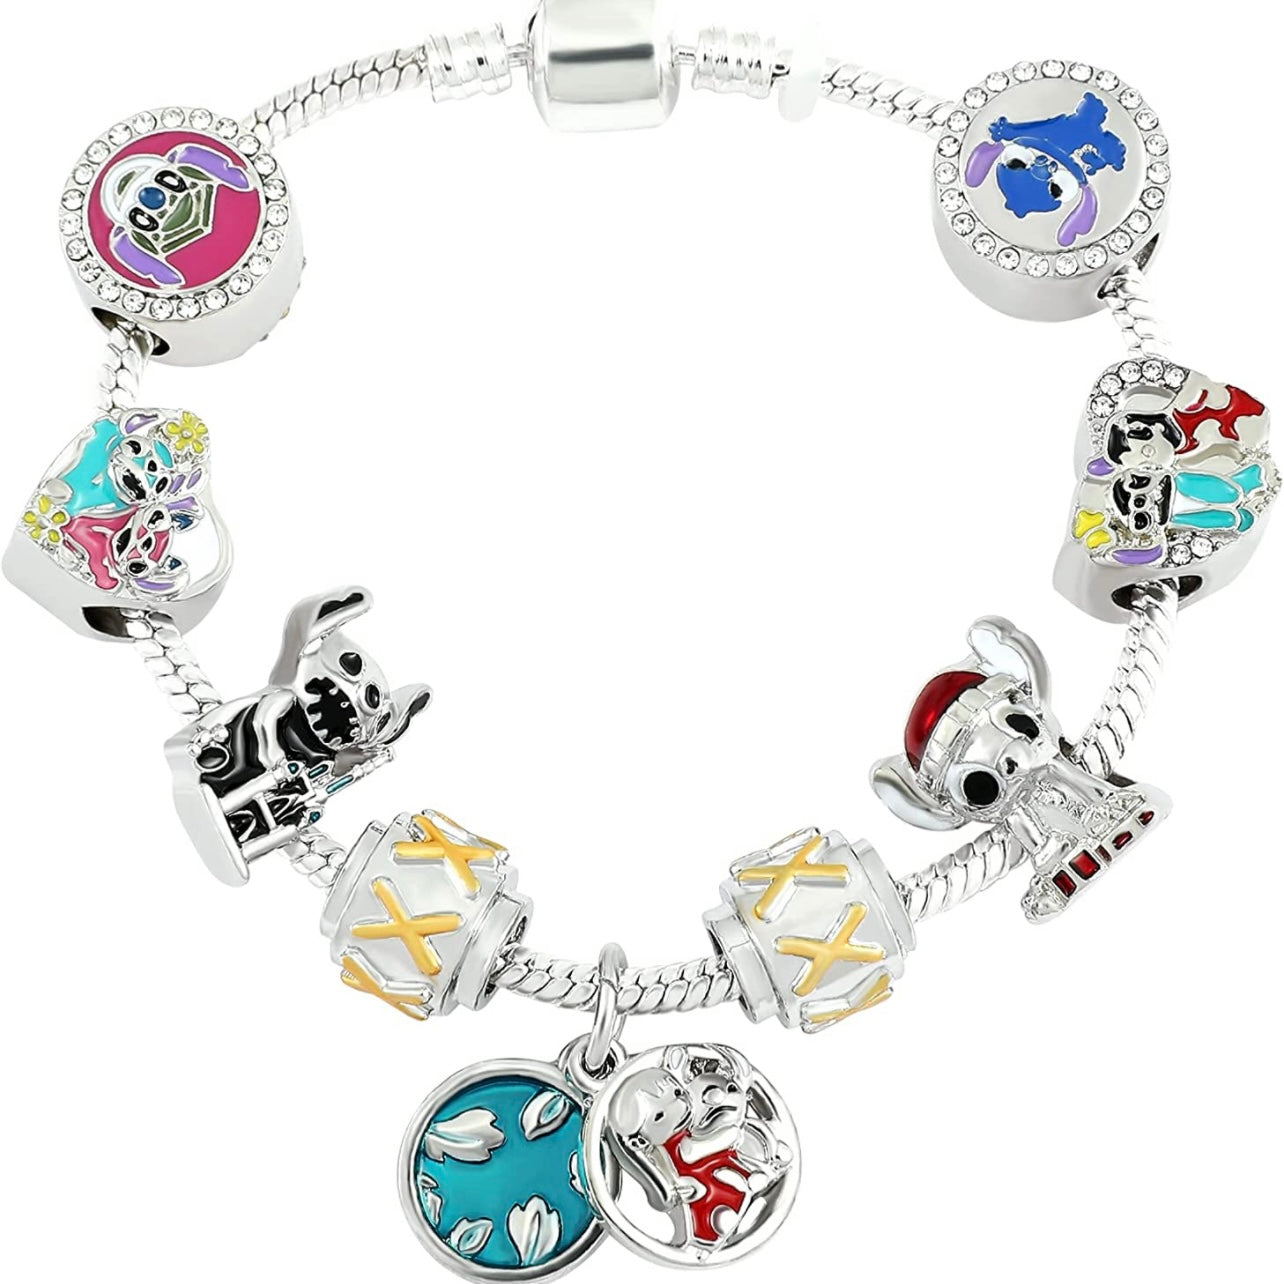 925 Sterling Silver Cartoon Series Lilo Stitch Charm Fit Bracelet Silver 925 Original Bead Charms for Jewelry Making Best Gift for Her